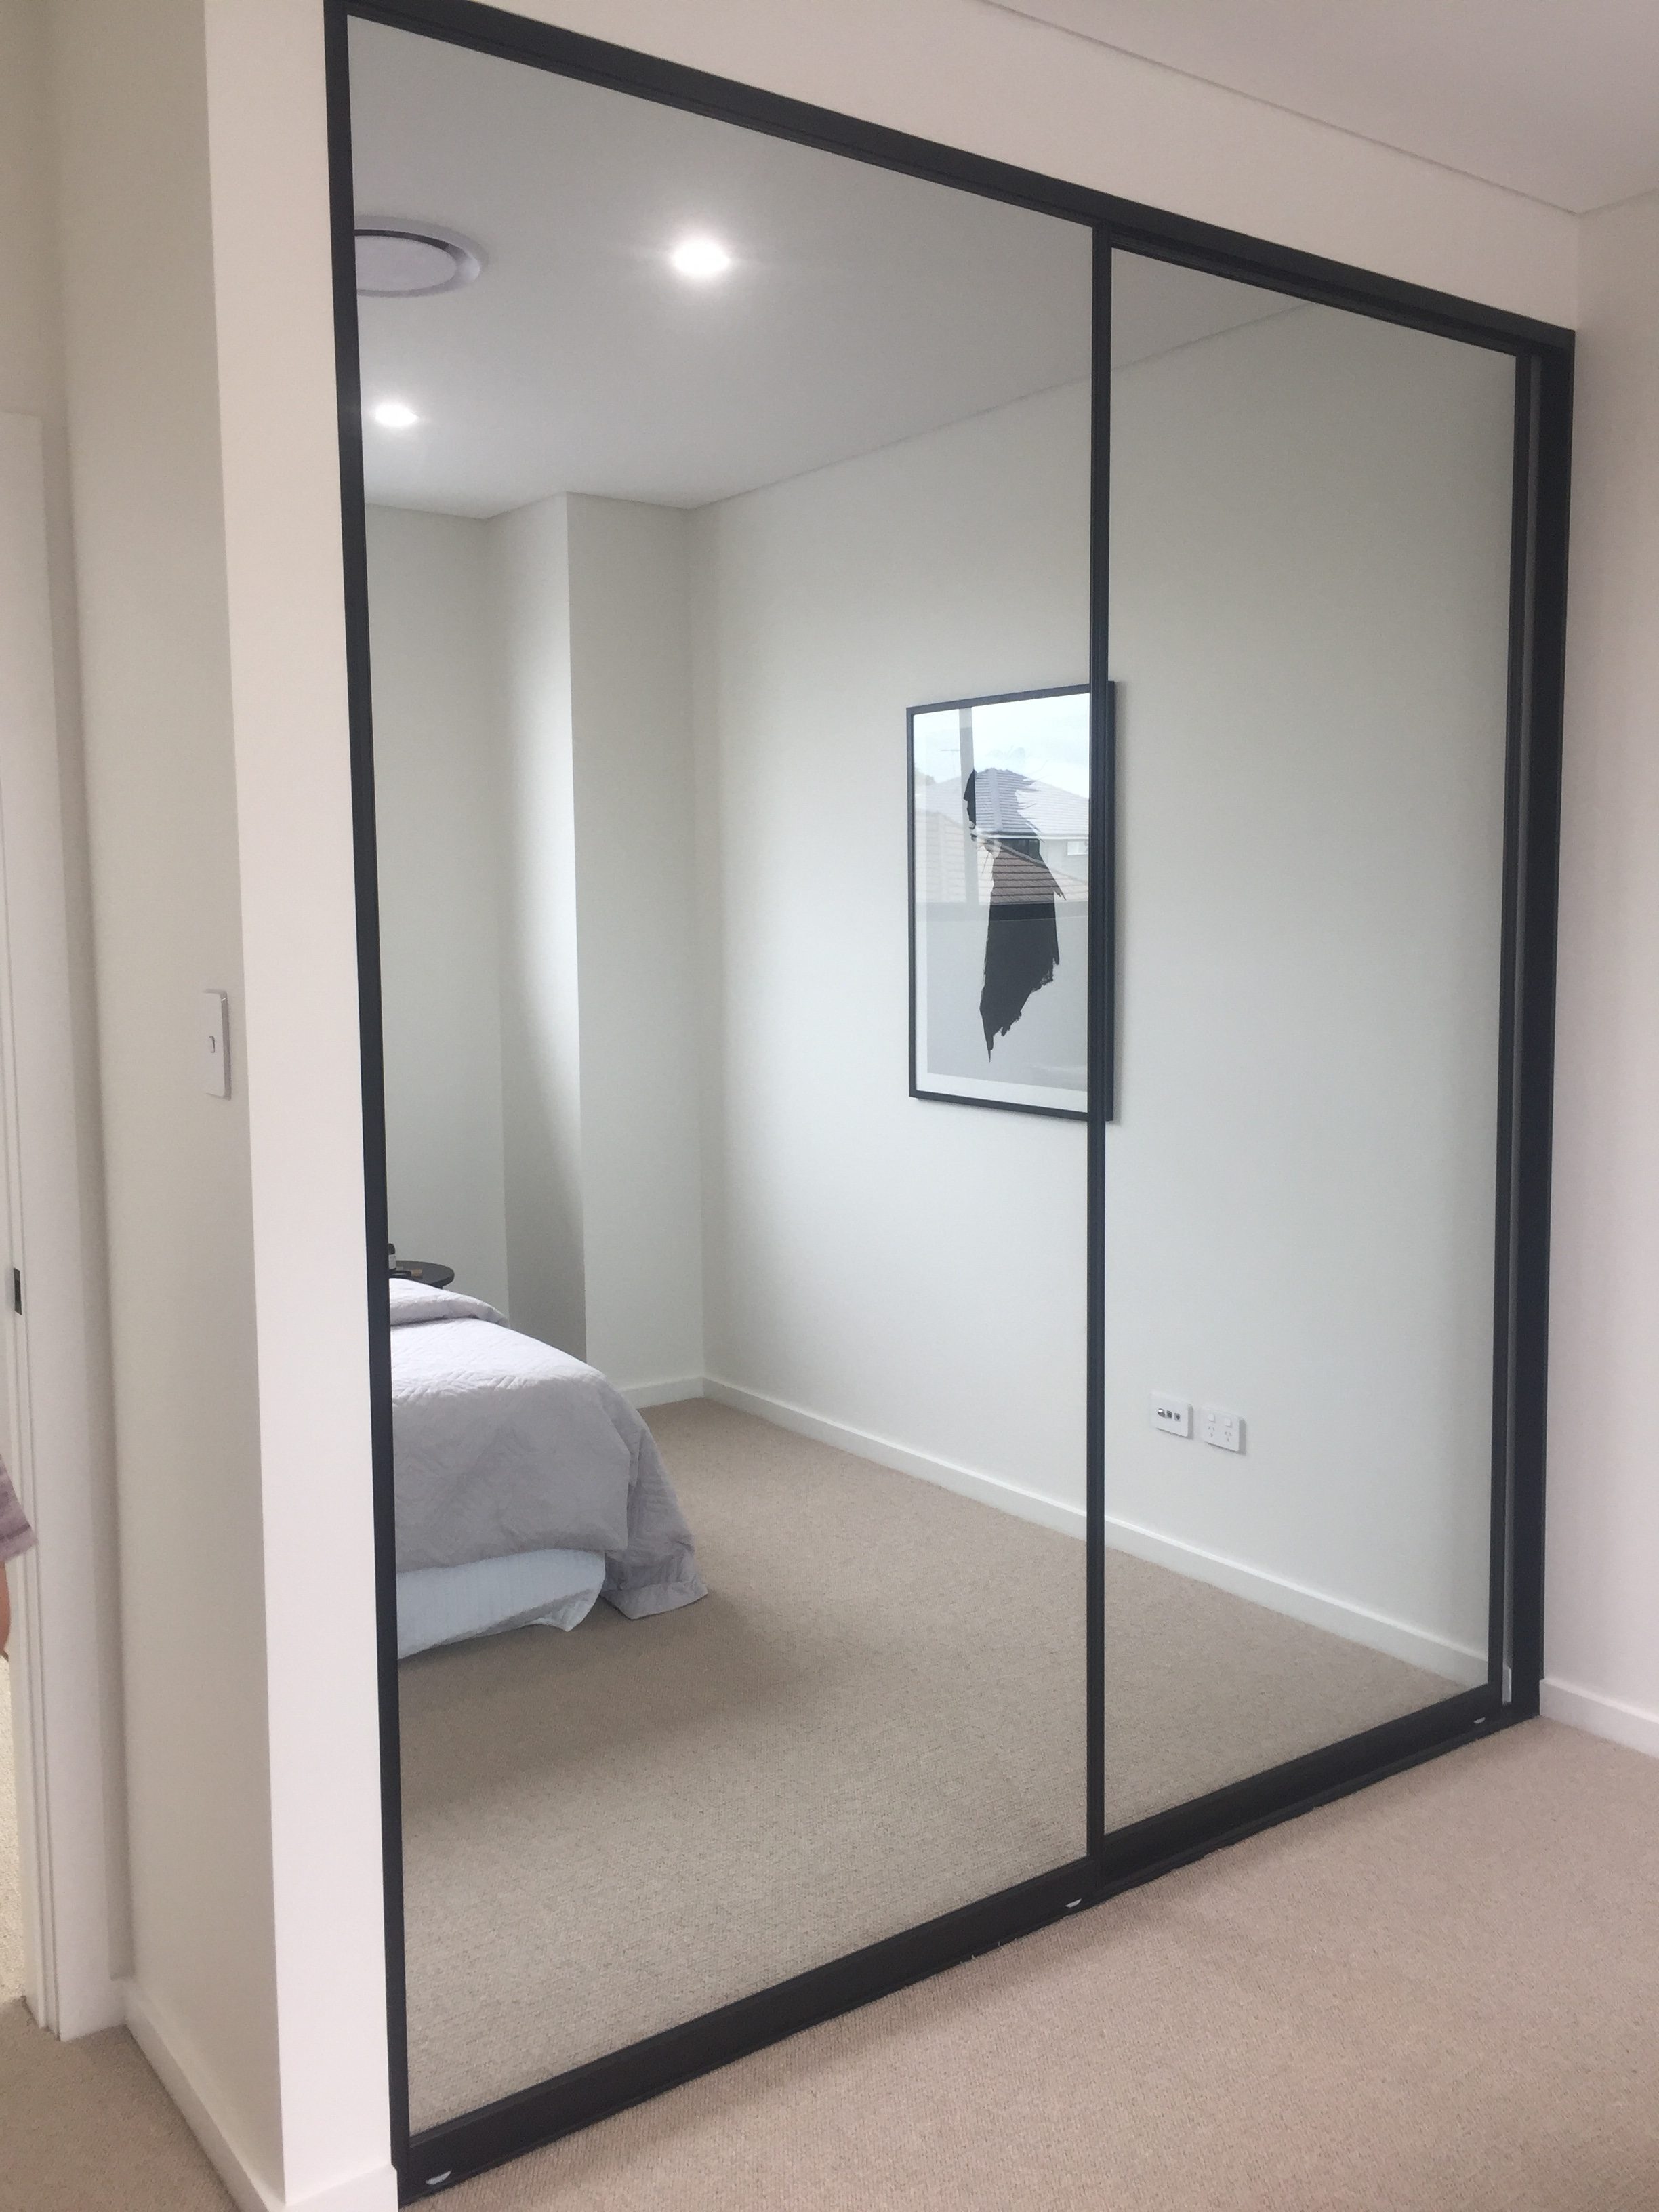 Wardrobe Doors - Glass and Mirror - Built in Wardrobes Sydney and ...